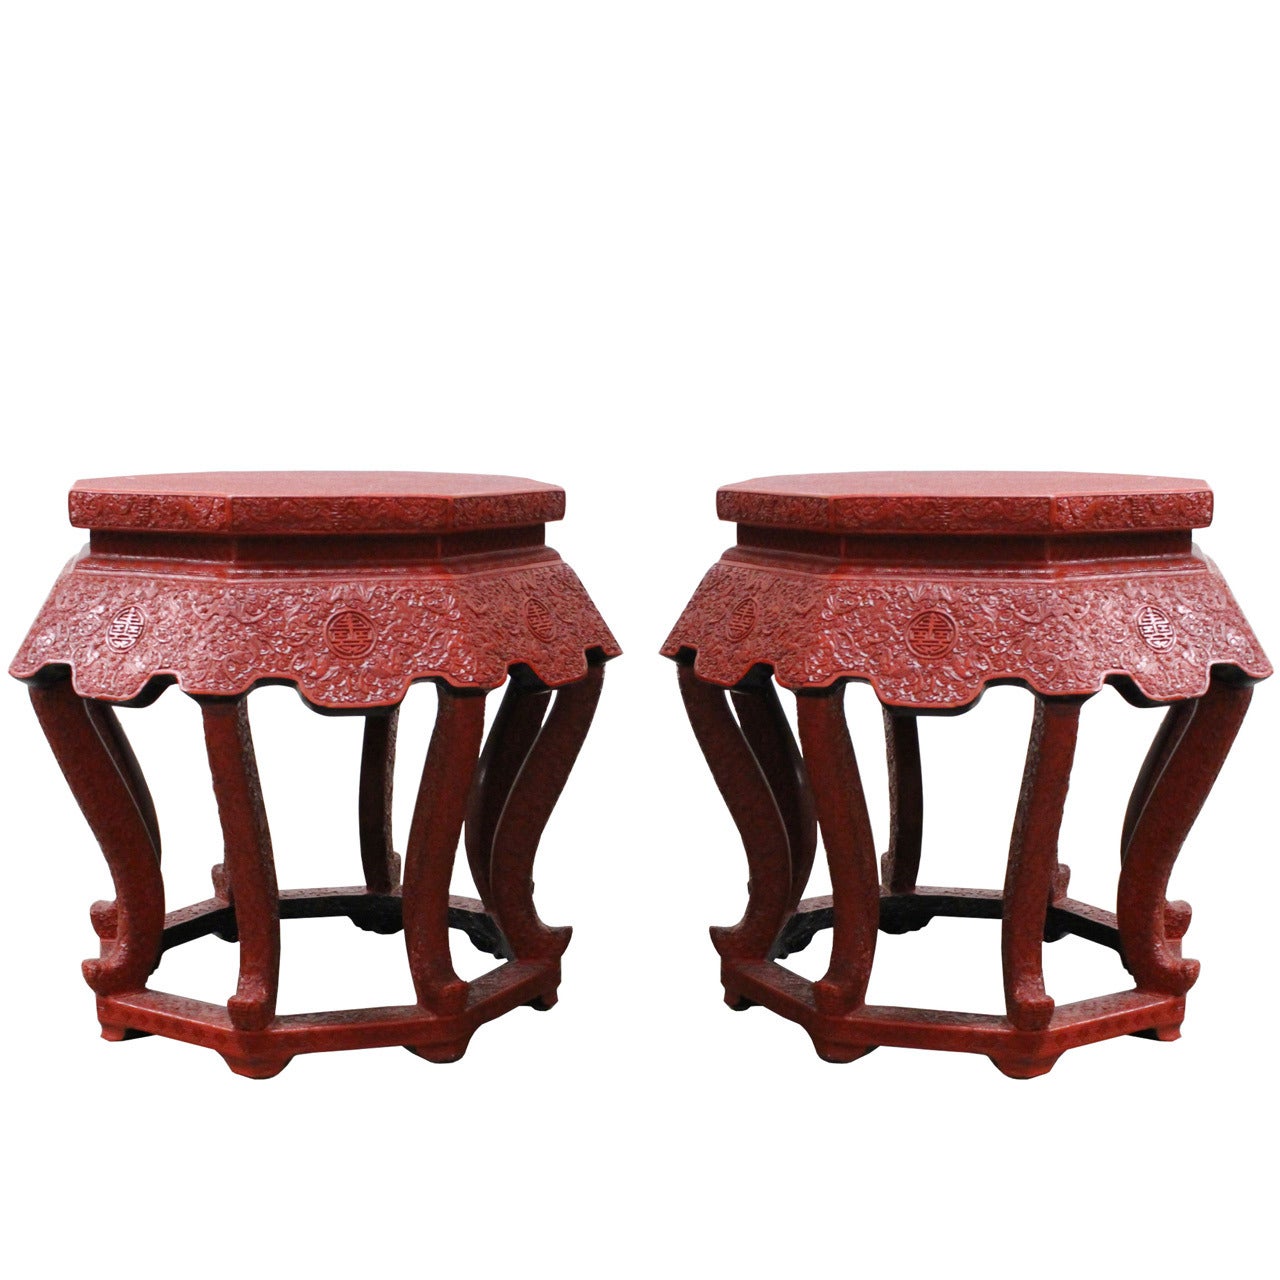 Pair of Octagonal Red Lacquer Asian Stools